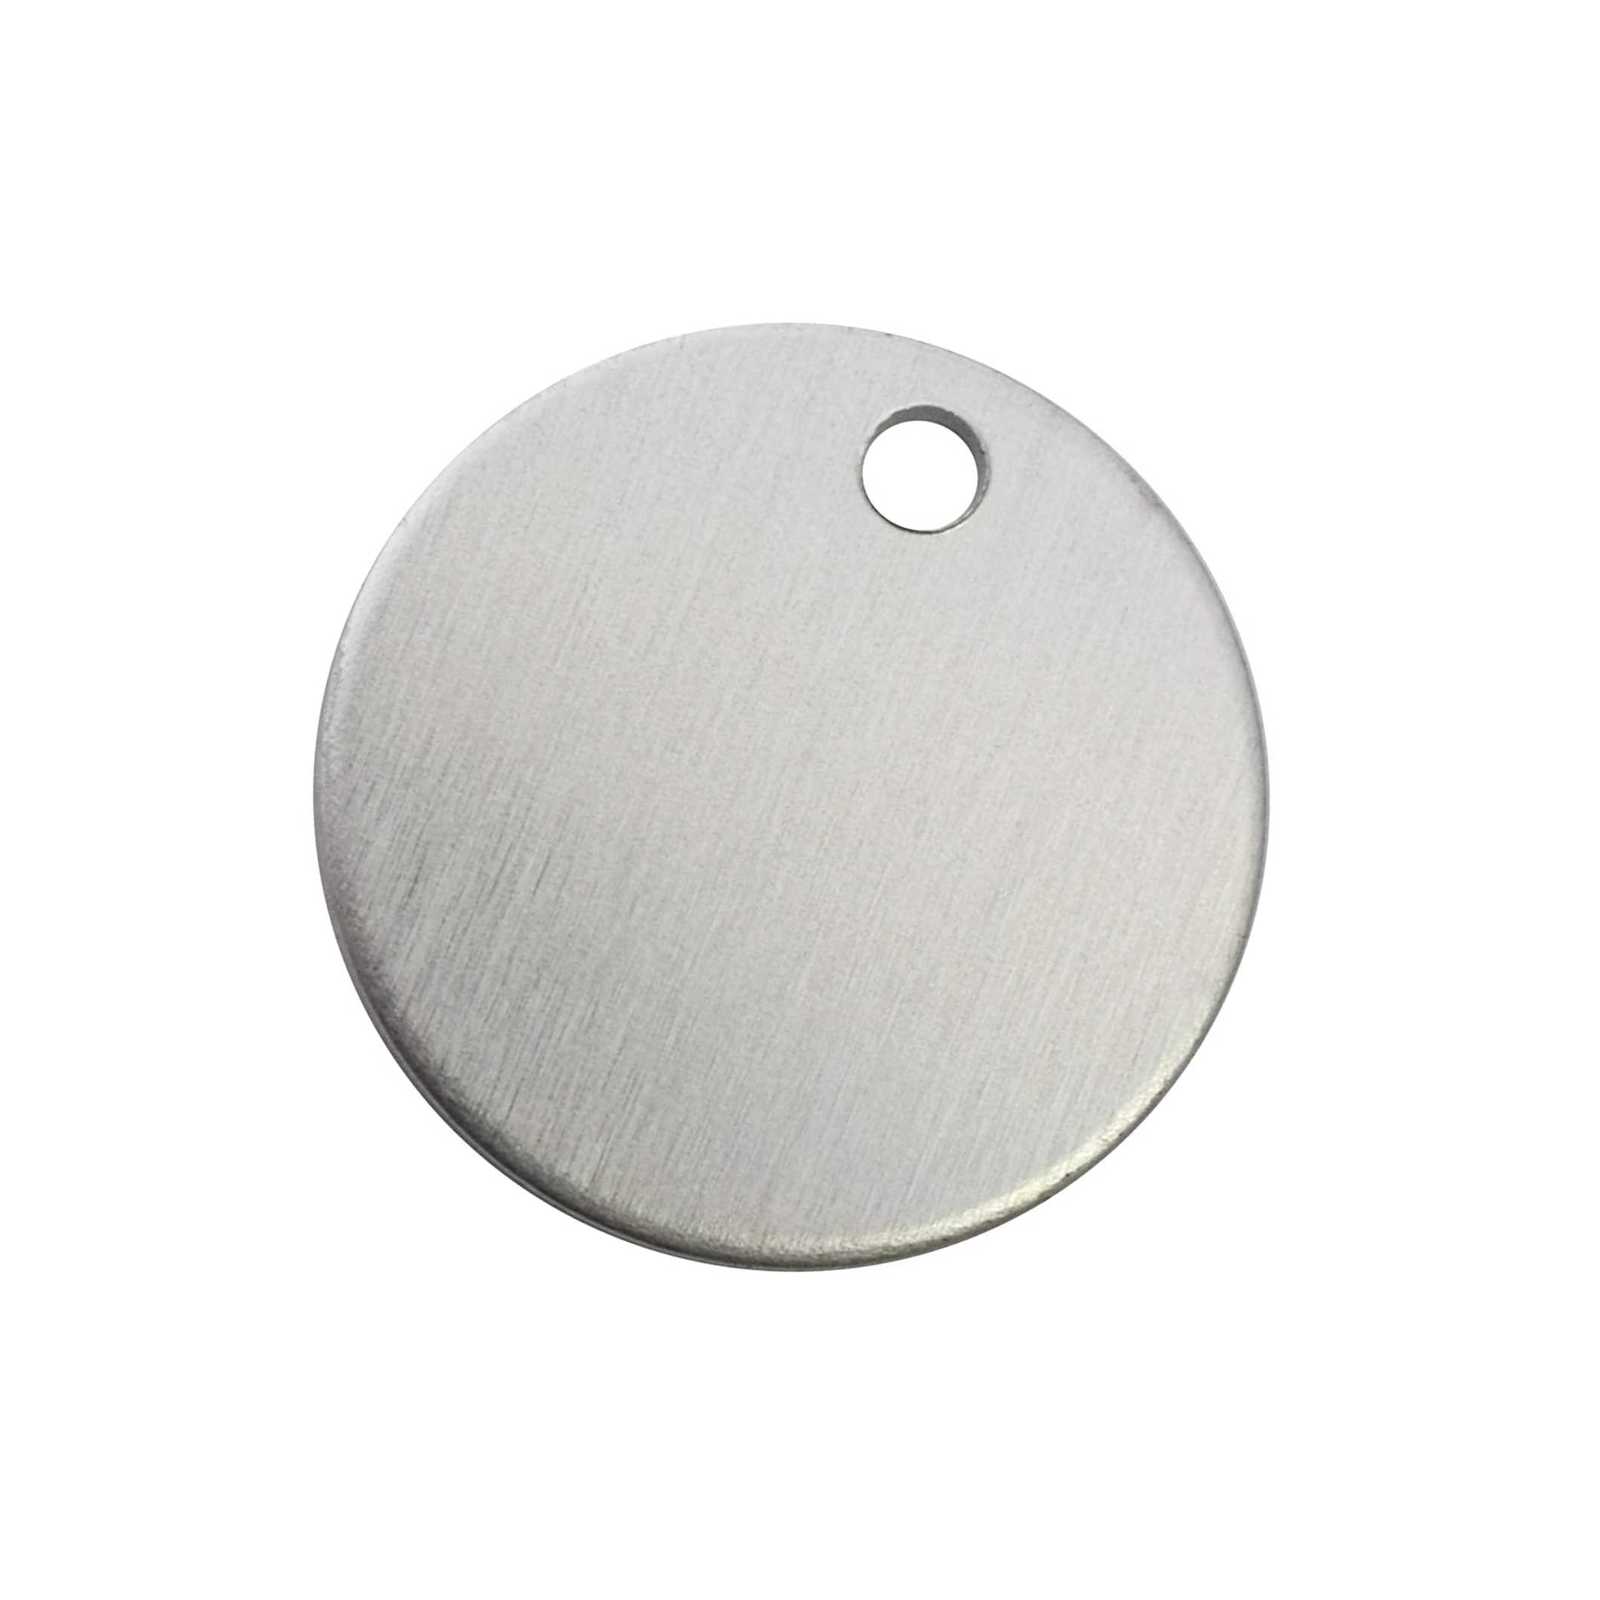 Ing Blanks, 1 Inch Round With Hole, Aluminum 0.063 Inch 14 Ga. - 50 Pack